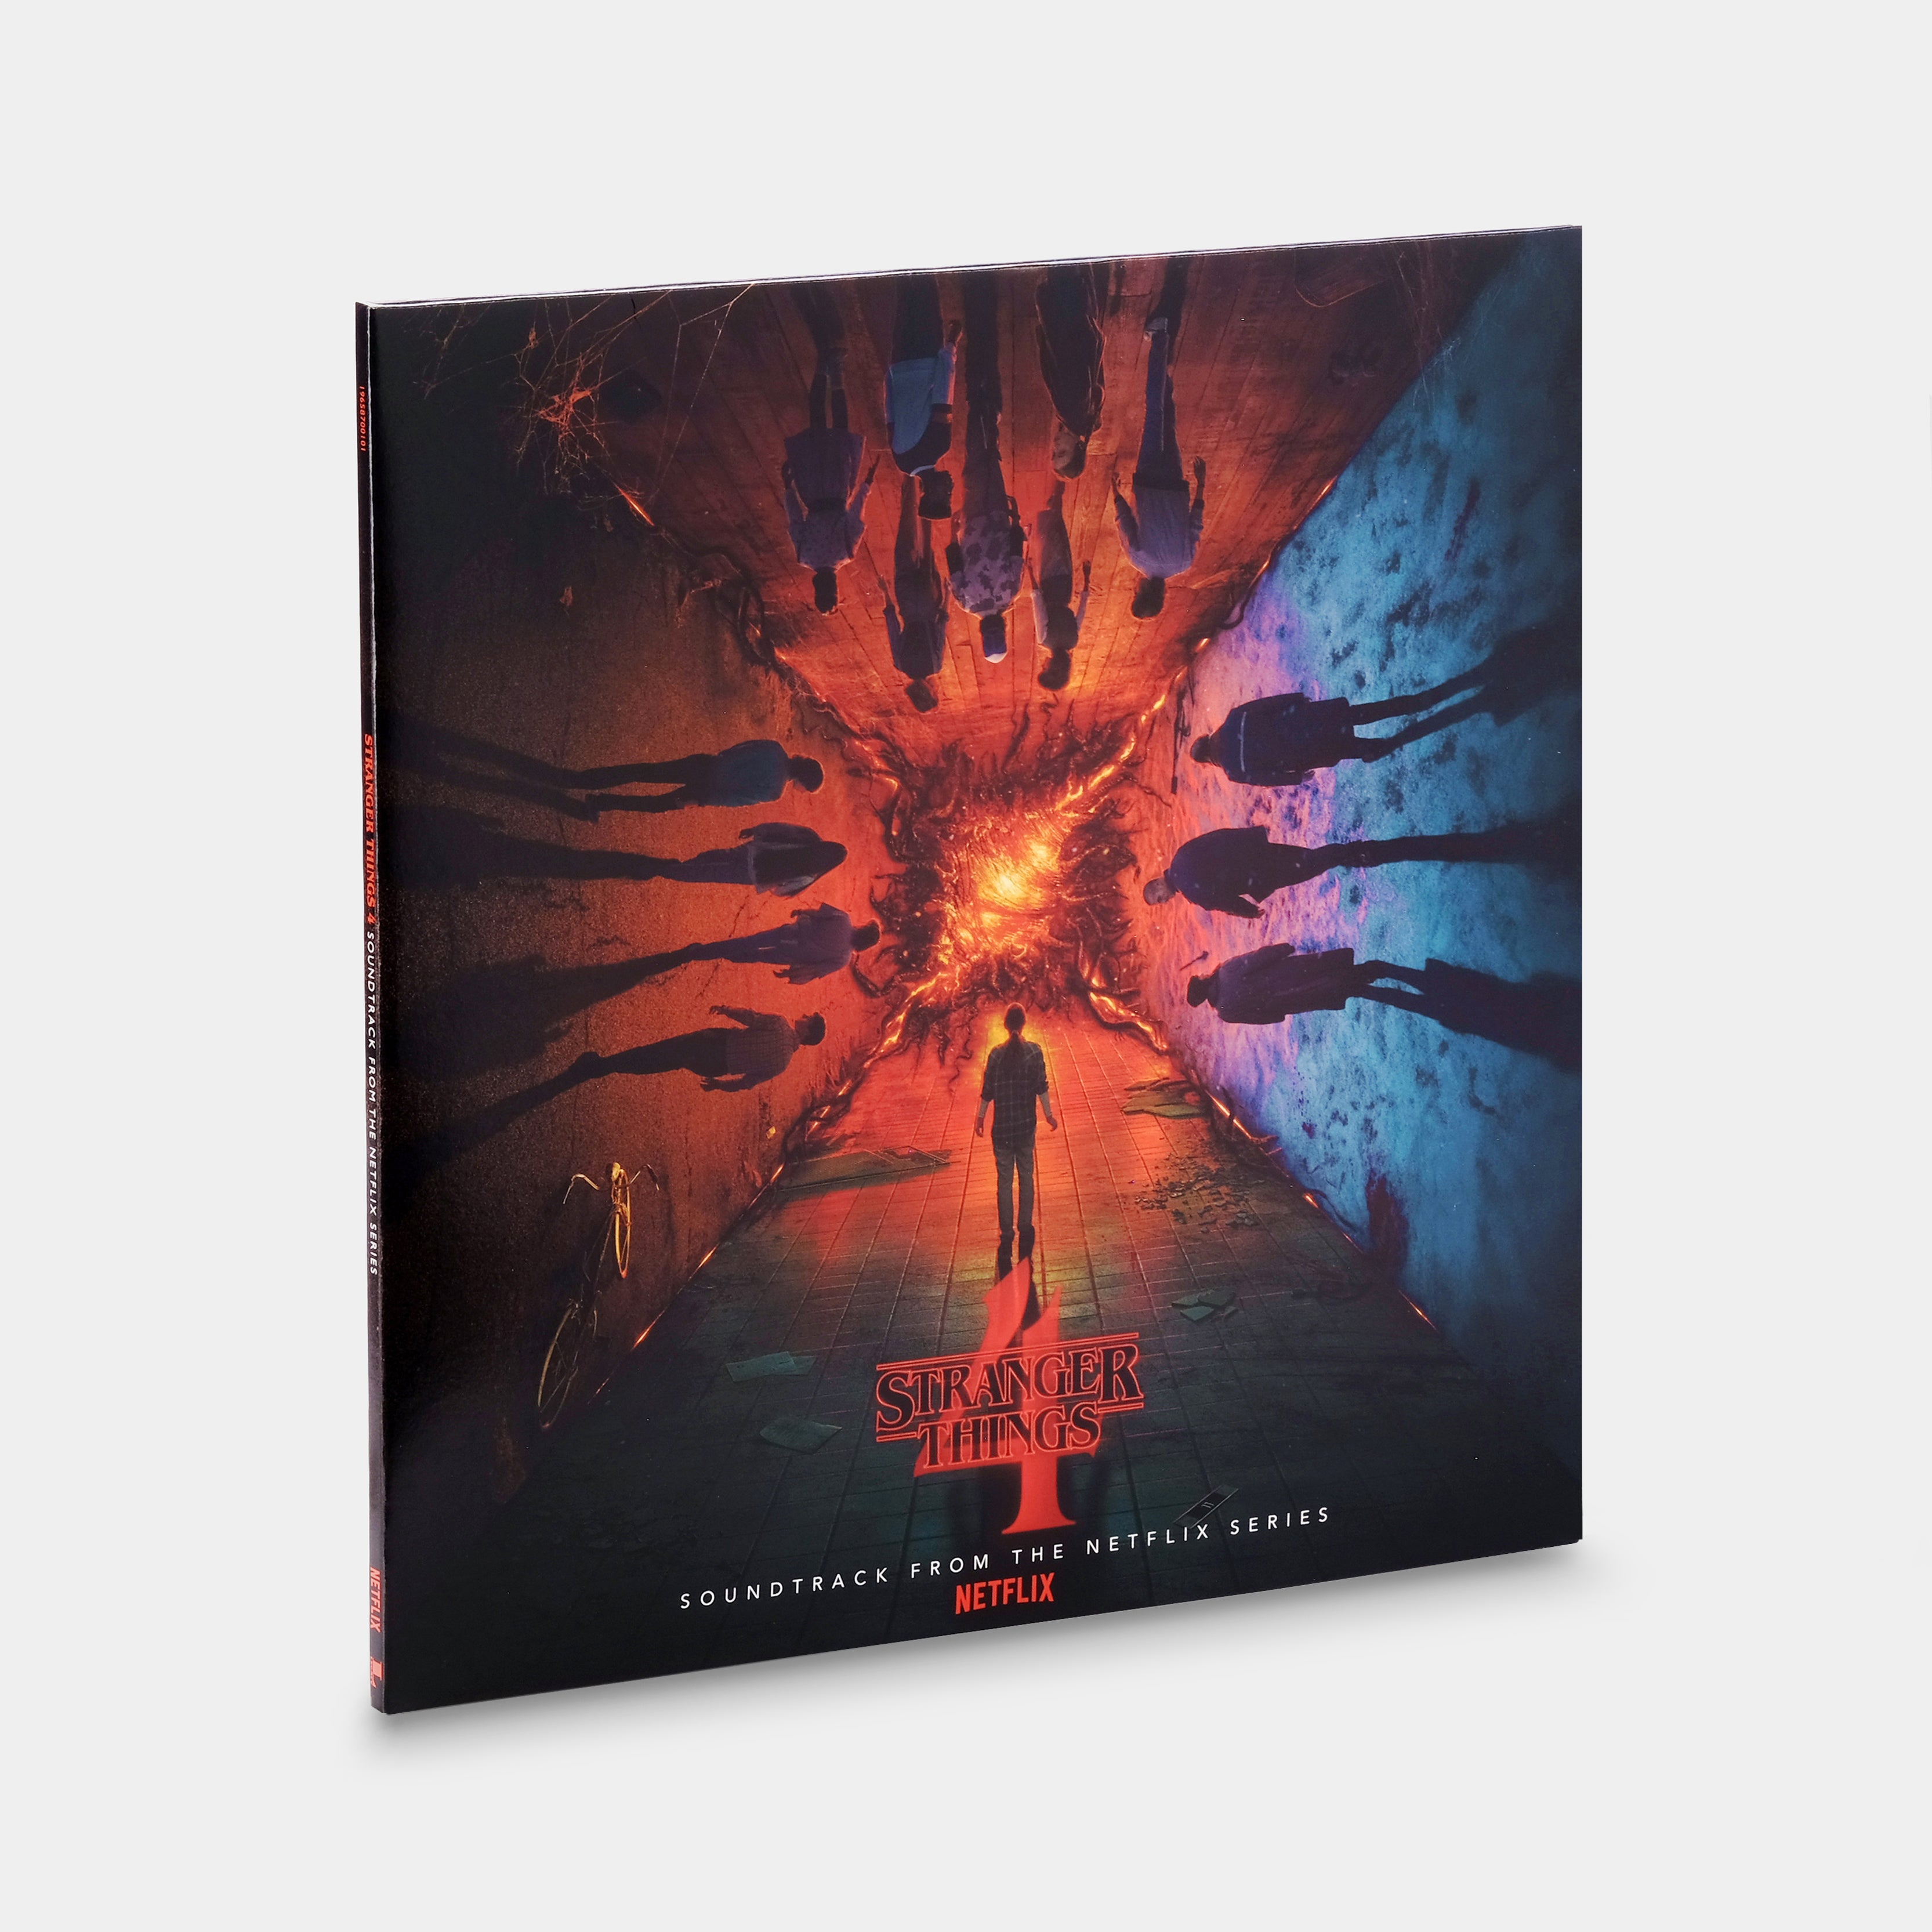 Stranger Things 4 - Soundtrack From The Netflix Series 2xLP Vinyl Record